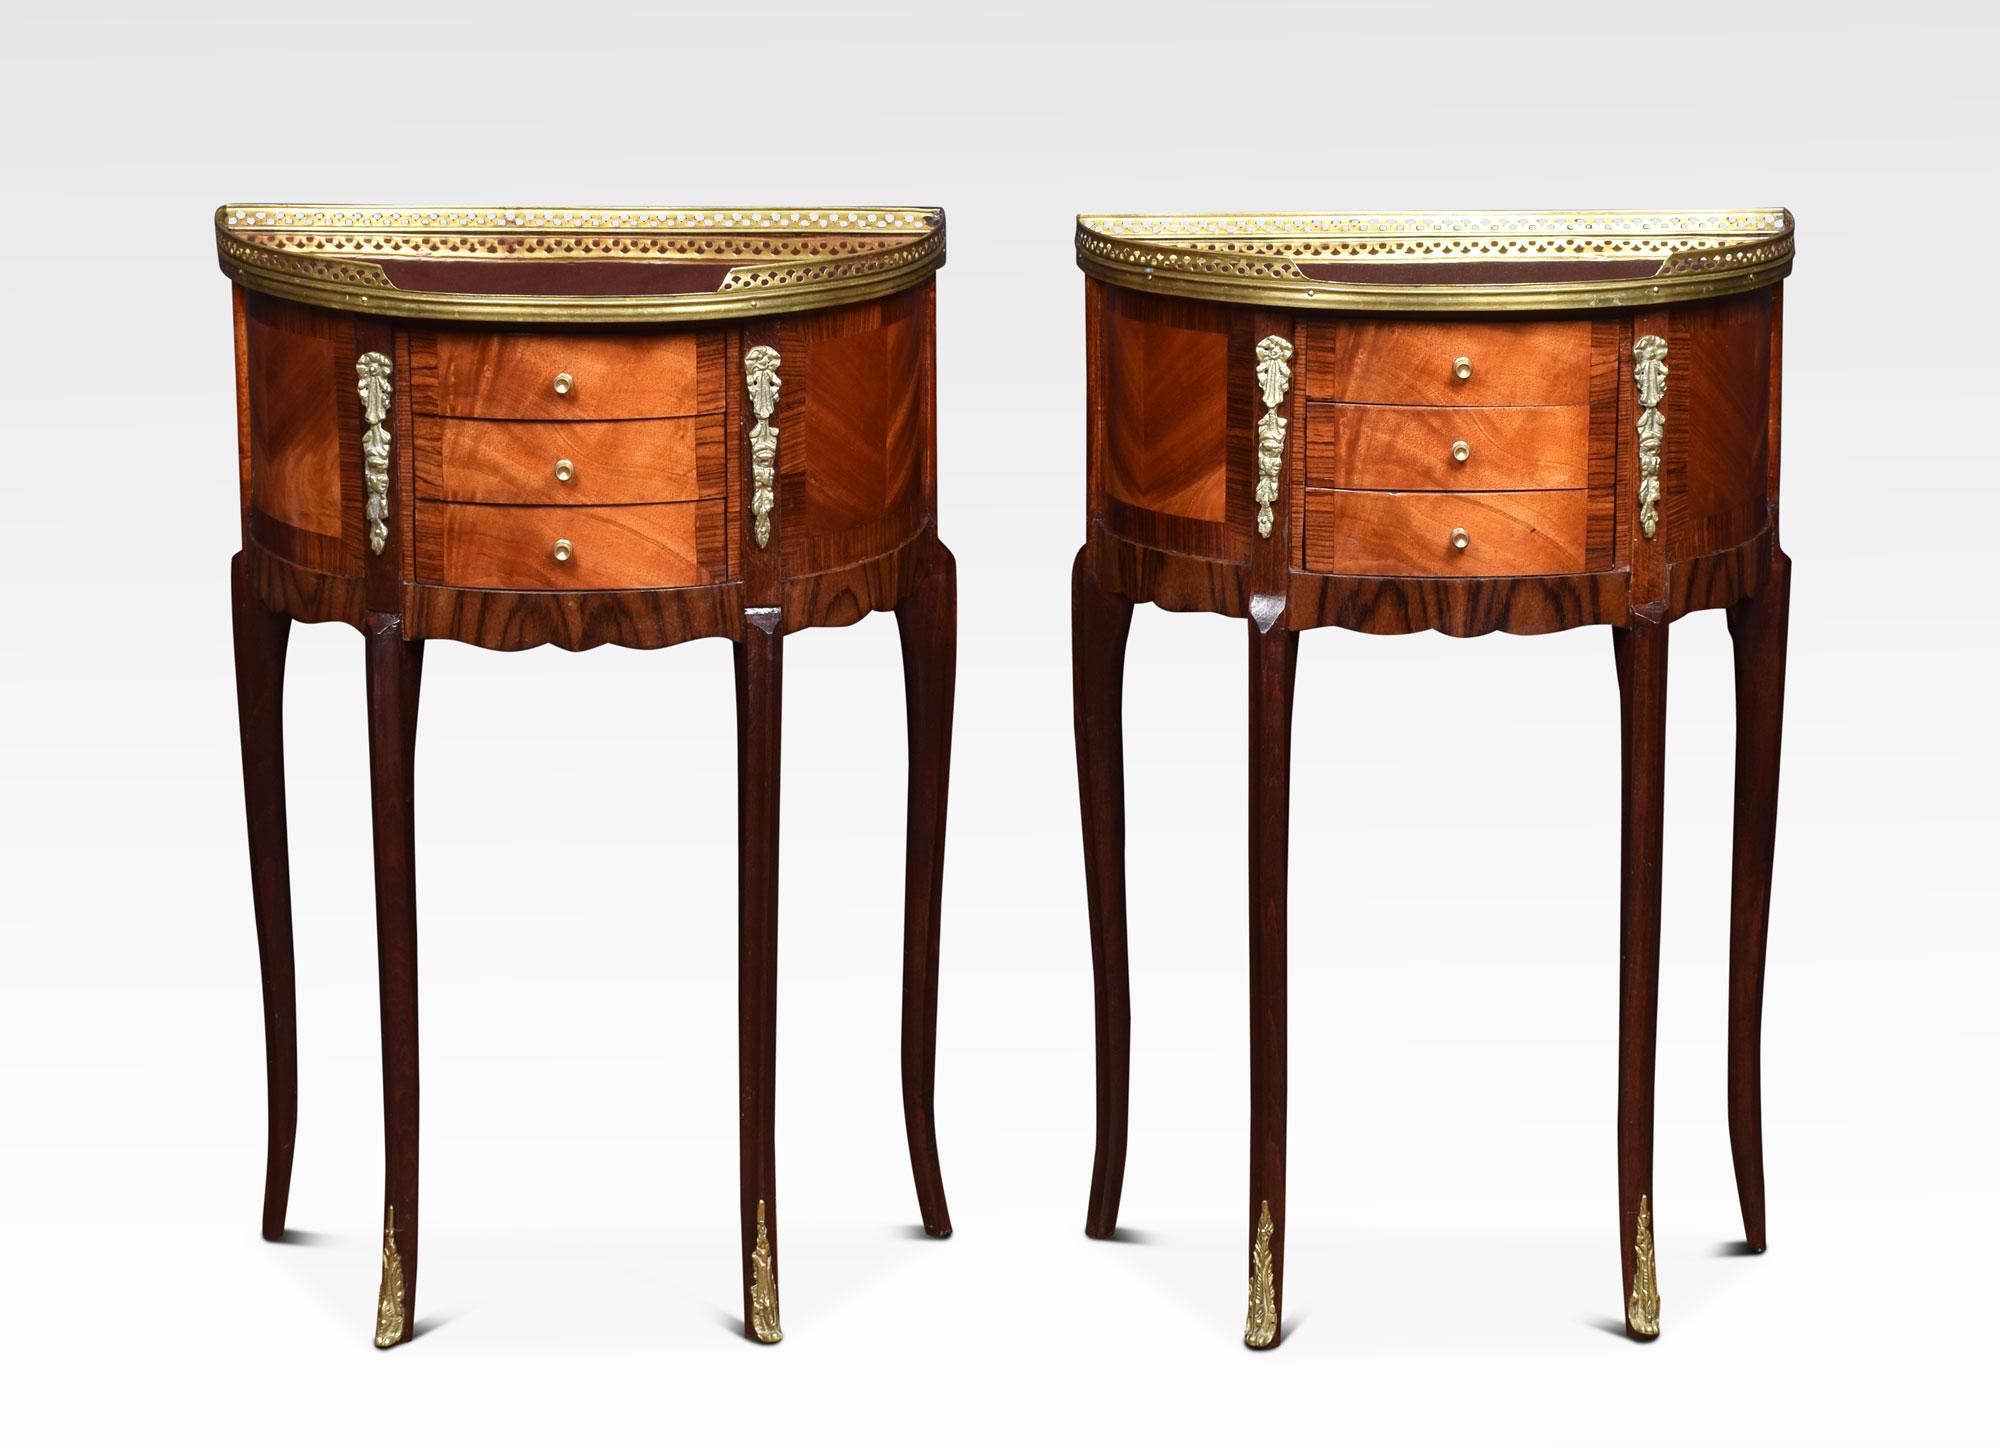 Pair of mahogany bedside chests, the bow-fronted tops with raised pierced gallery. Above three short draws drawers, all raised up on slender cabriole legs with gilt metal mounts.
Dimensions:
Height 28.5 inches
Width 19 inches
Depth 11 inches.